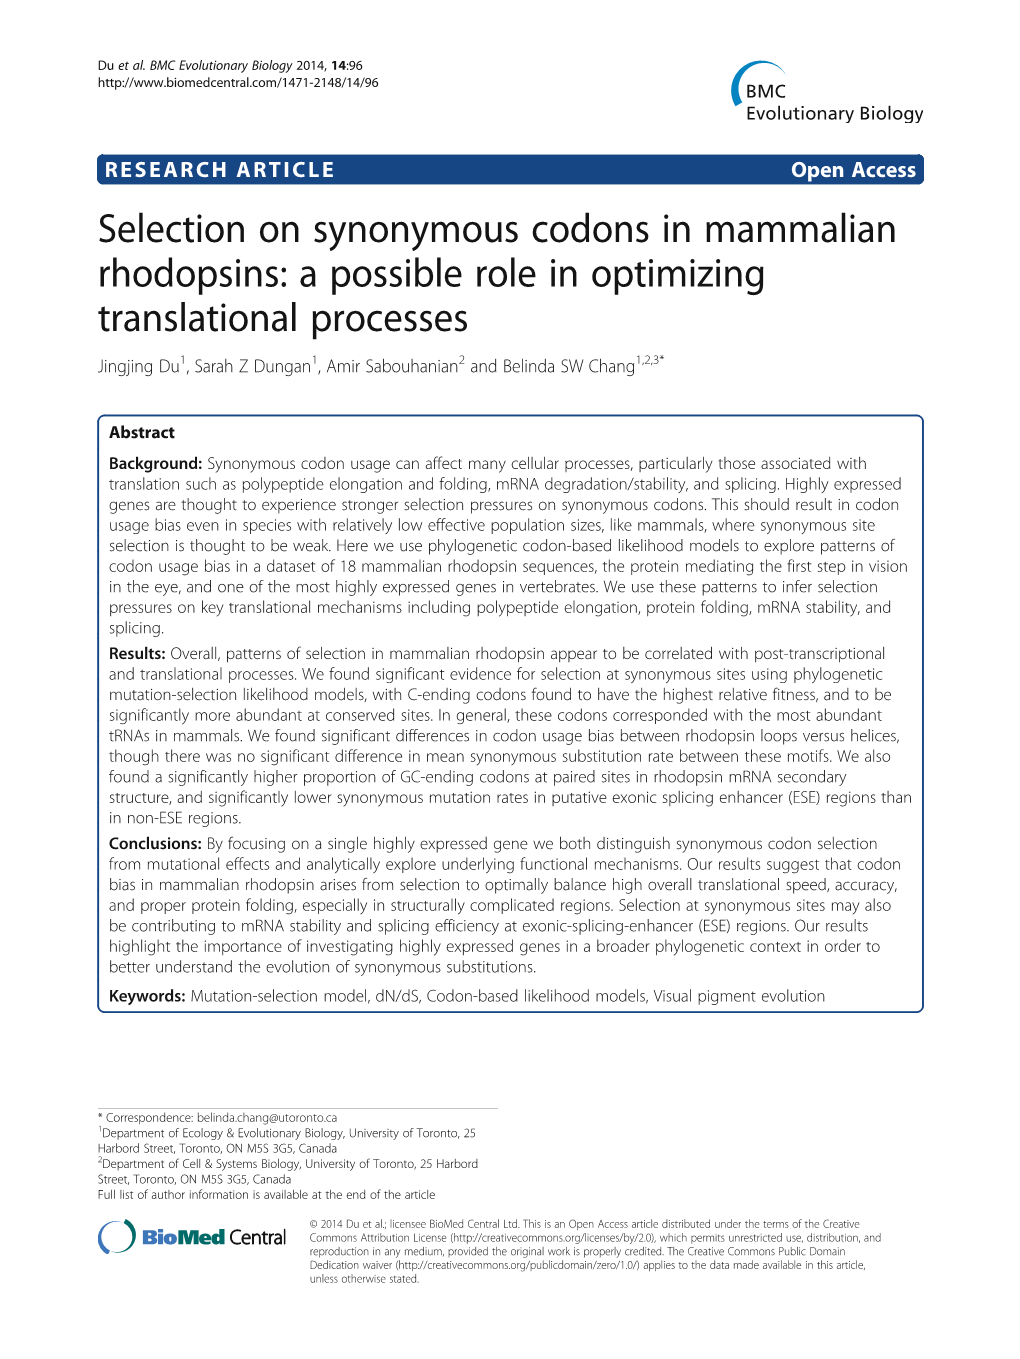 Selection on Synonymous Codons in Mammalian Rhodopsins: a Possible Role in Optimizing Translational Processes